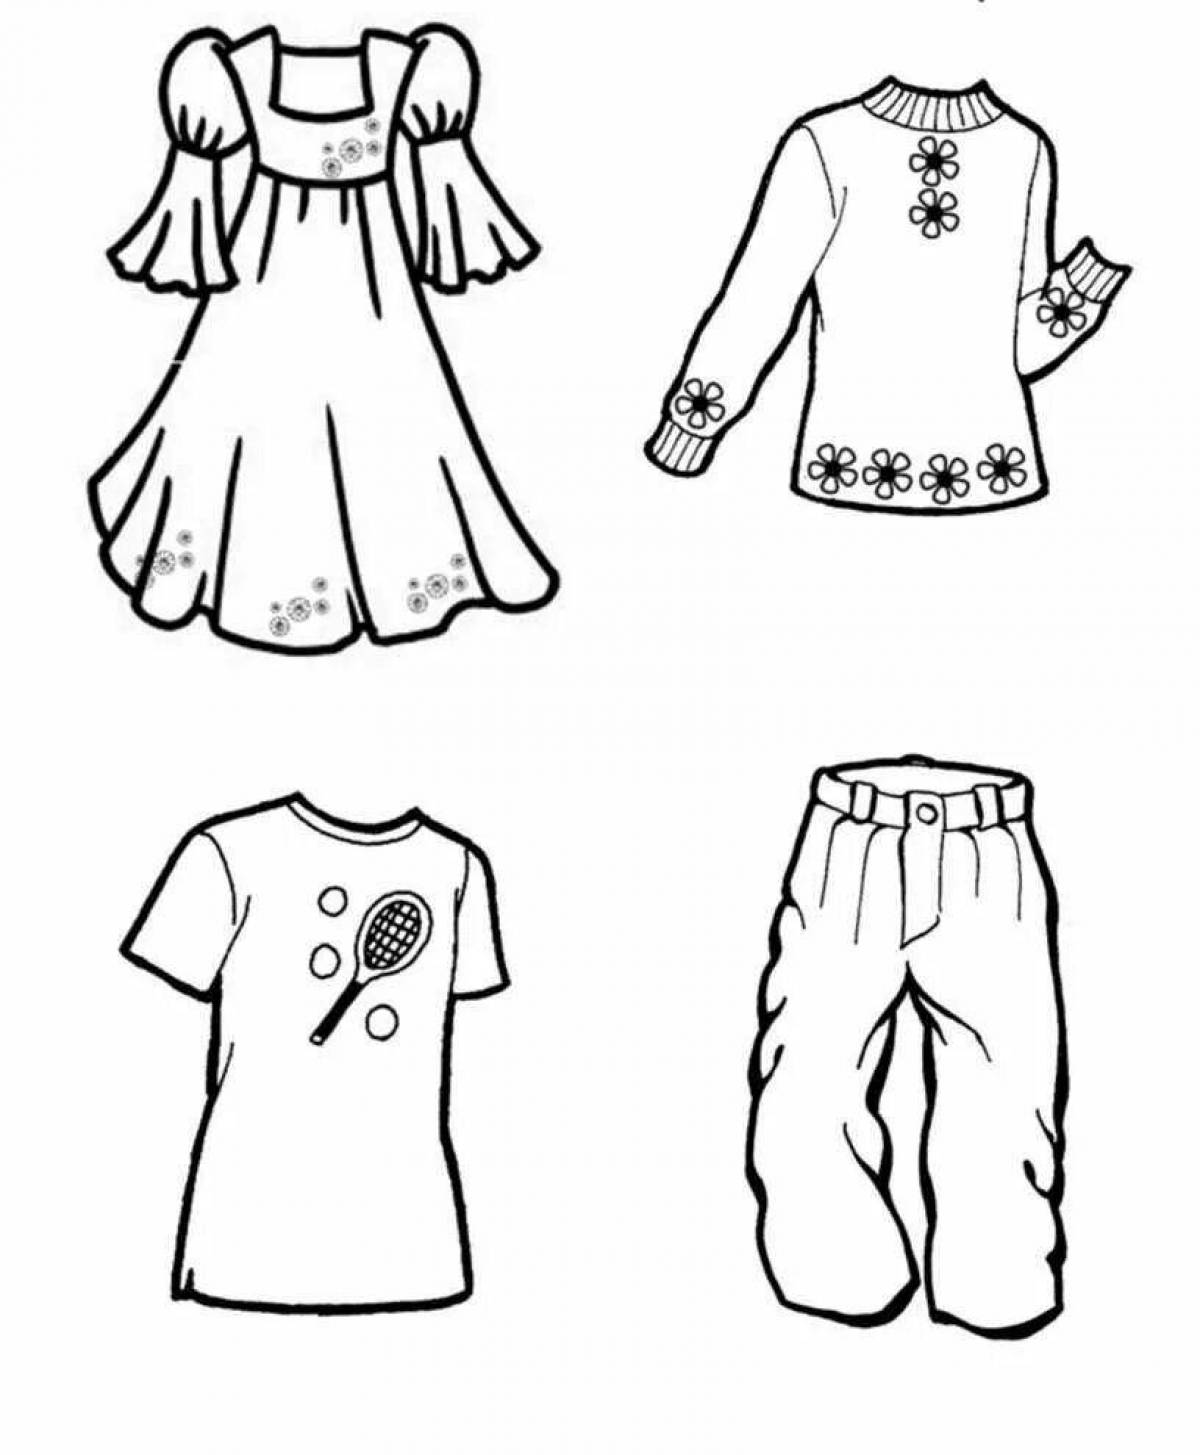 Types of clothing #21